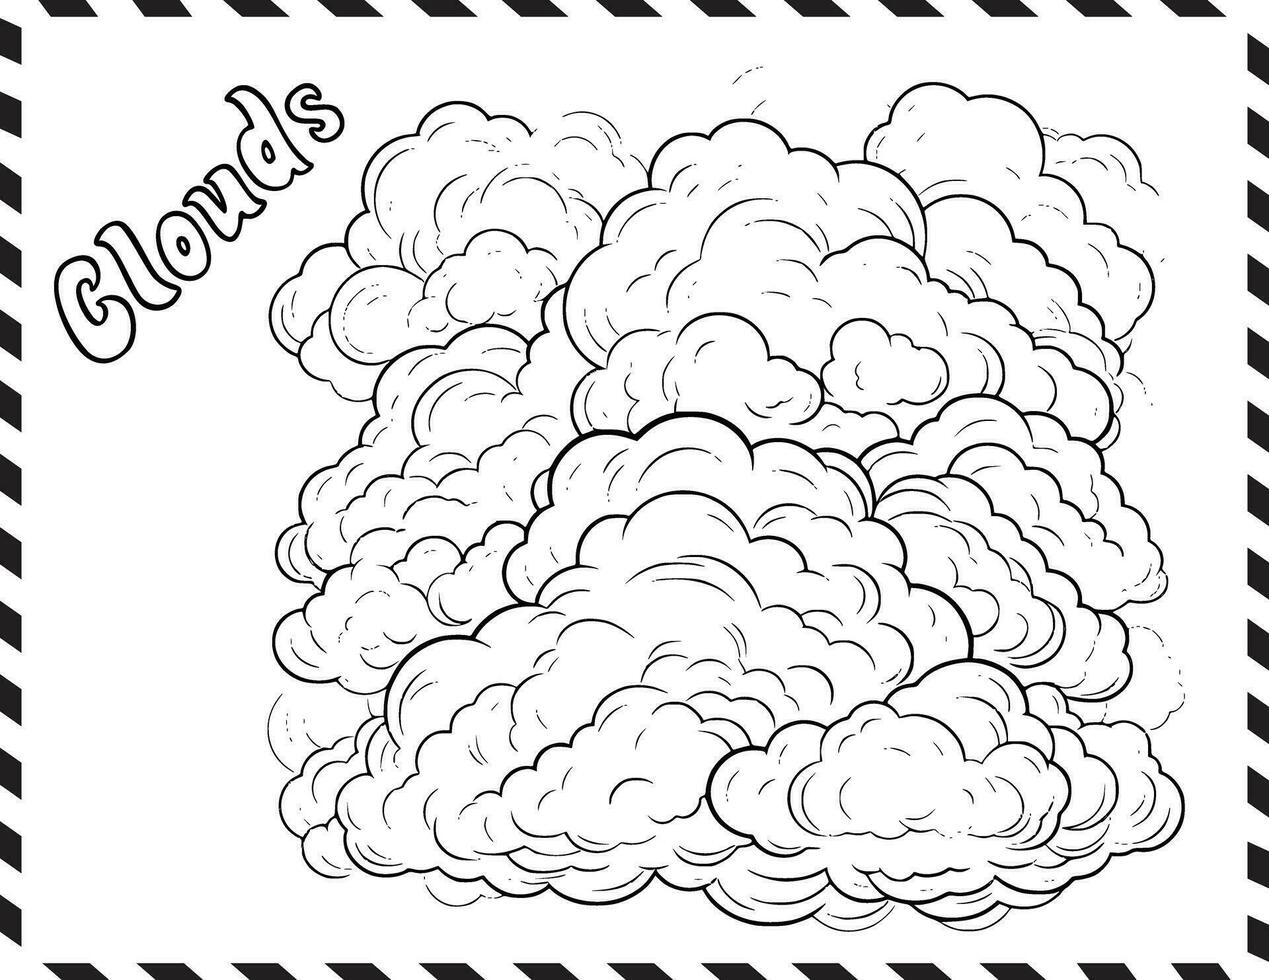 Clouds Coloring Page Drawing For Kids vector